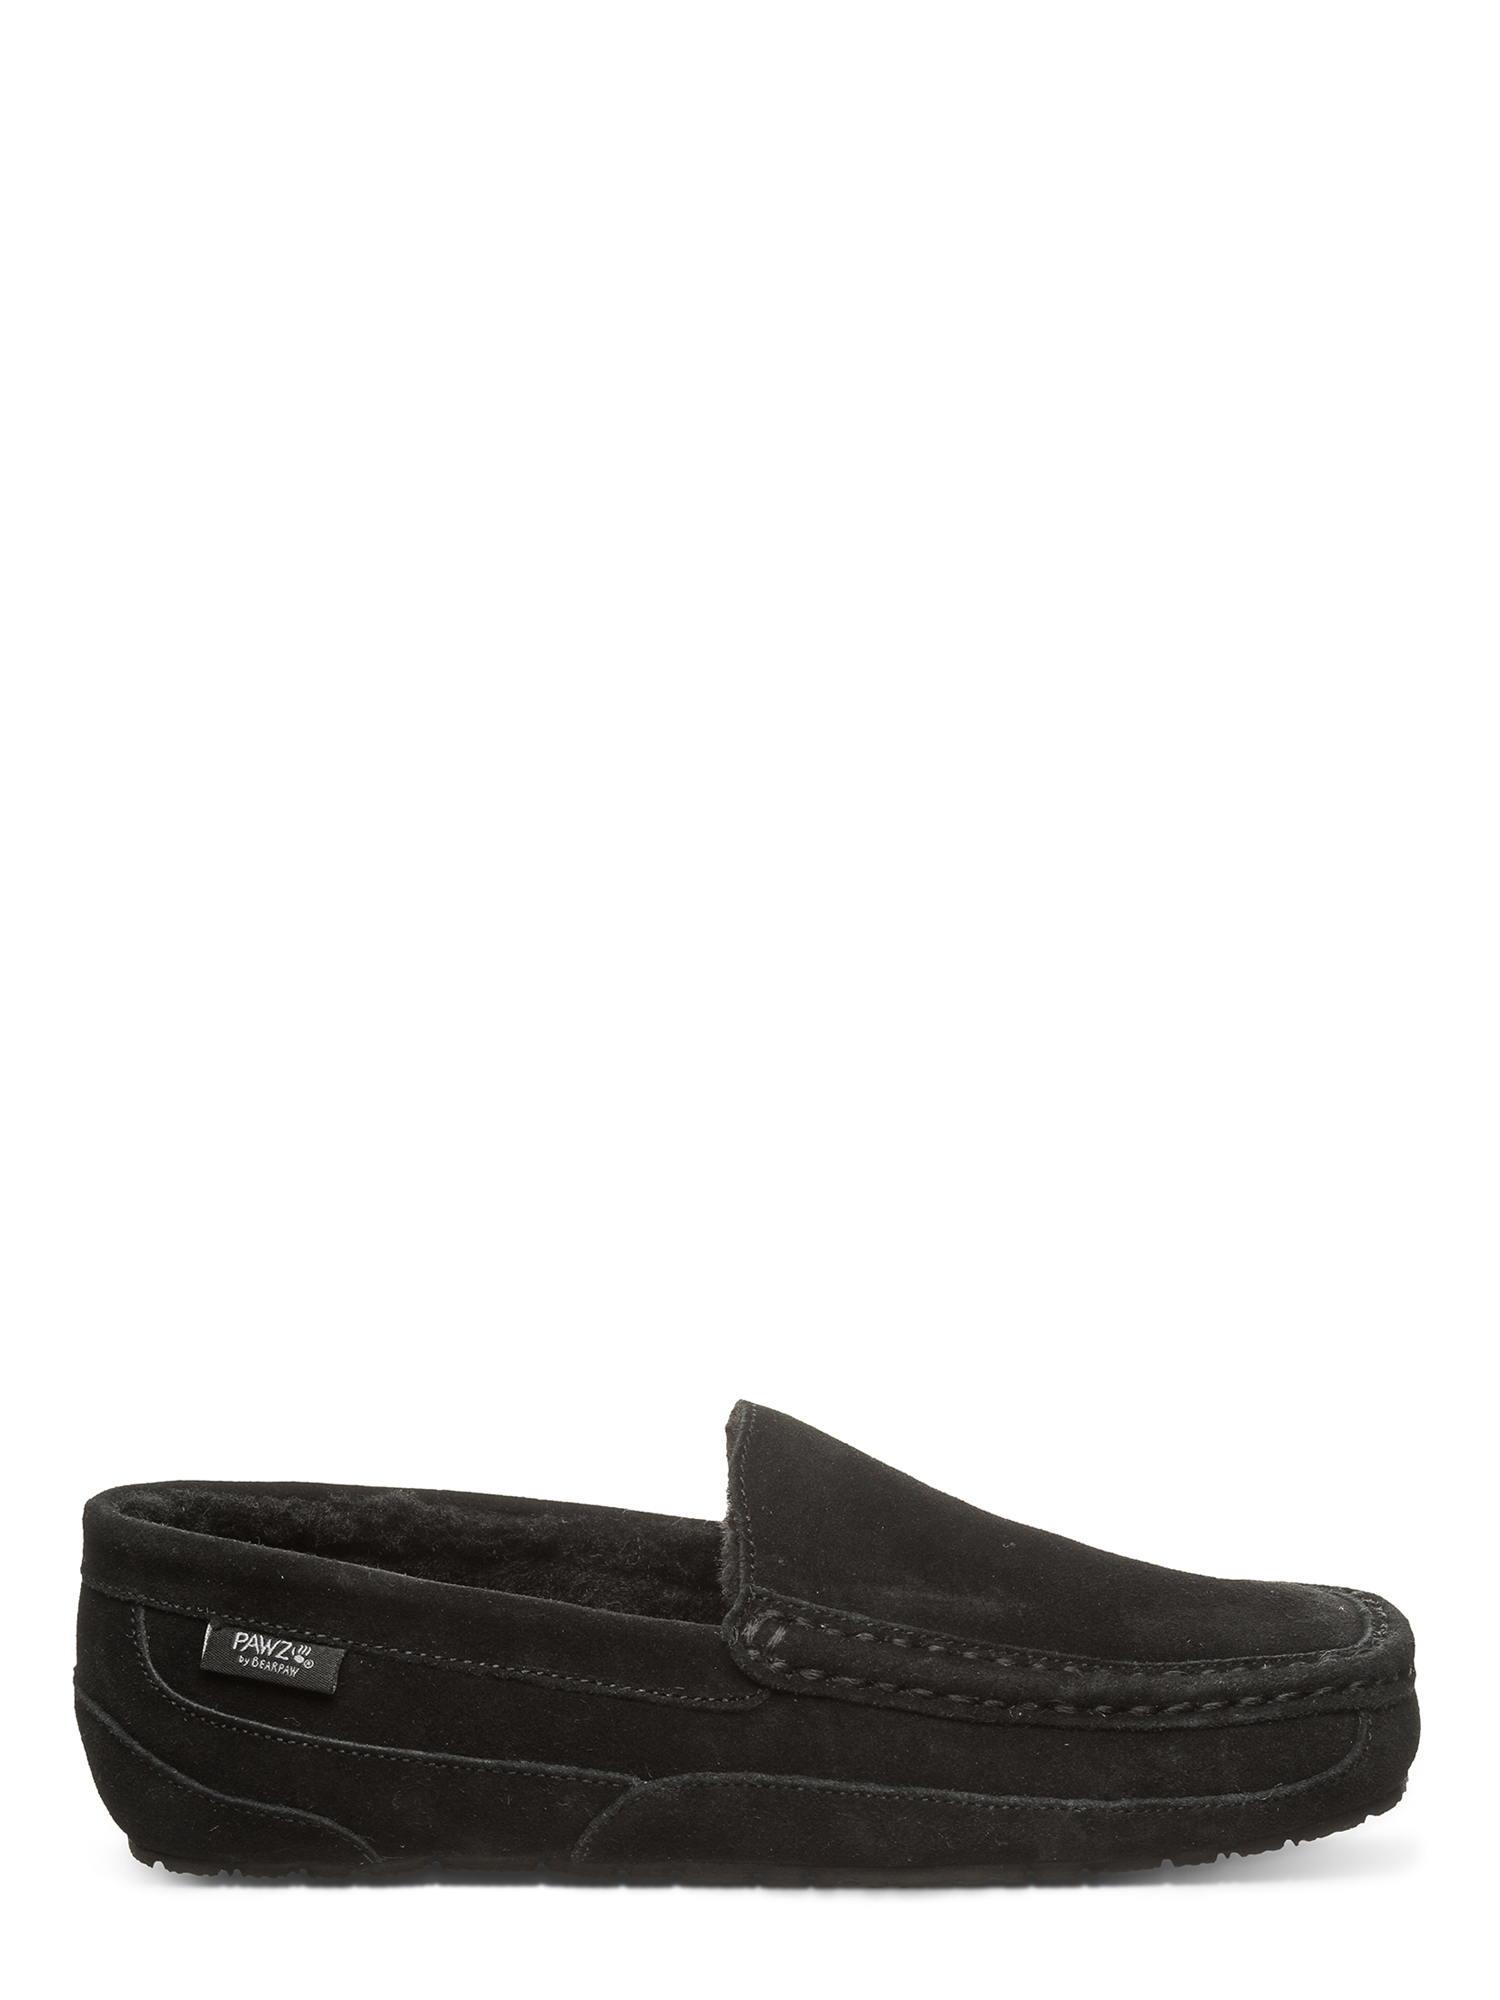 Pawz by Bearpaw Men's Caleb Genuine Suede Moccasin Slippers - image 4 of 5